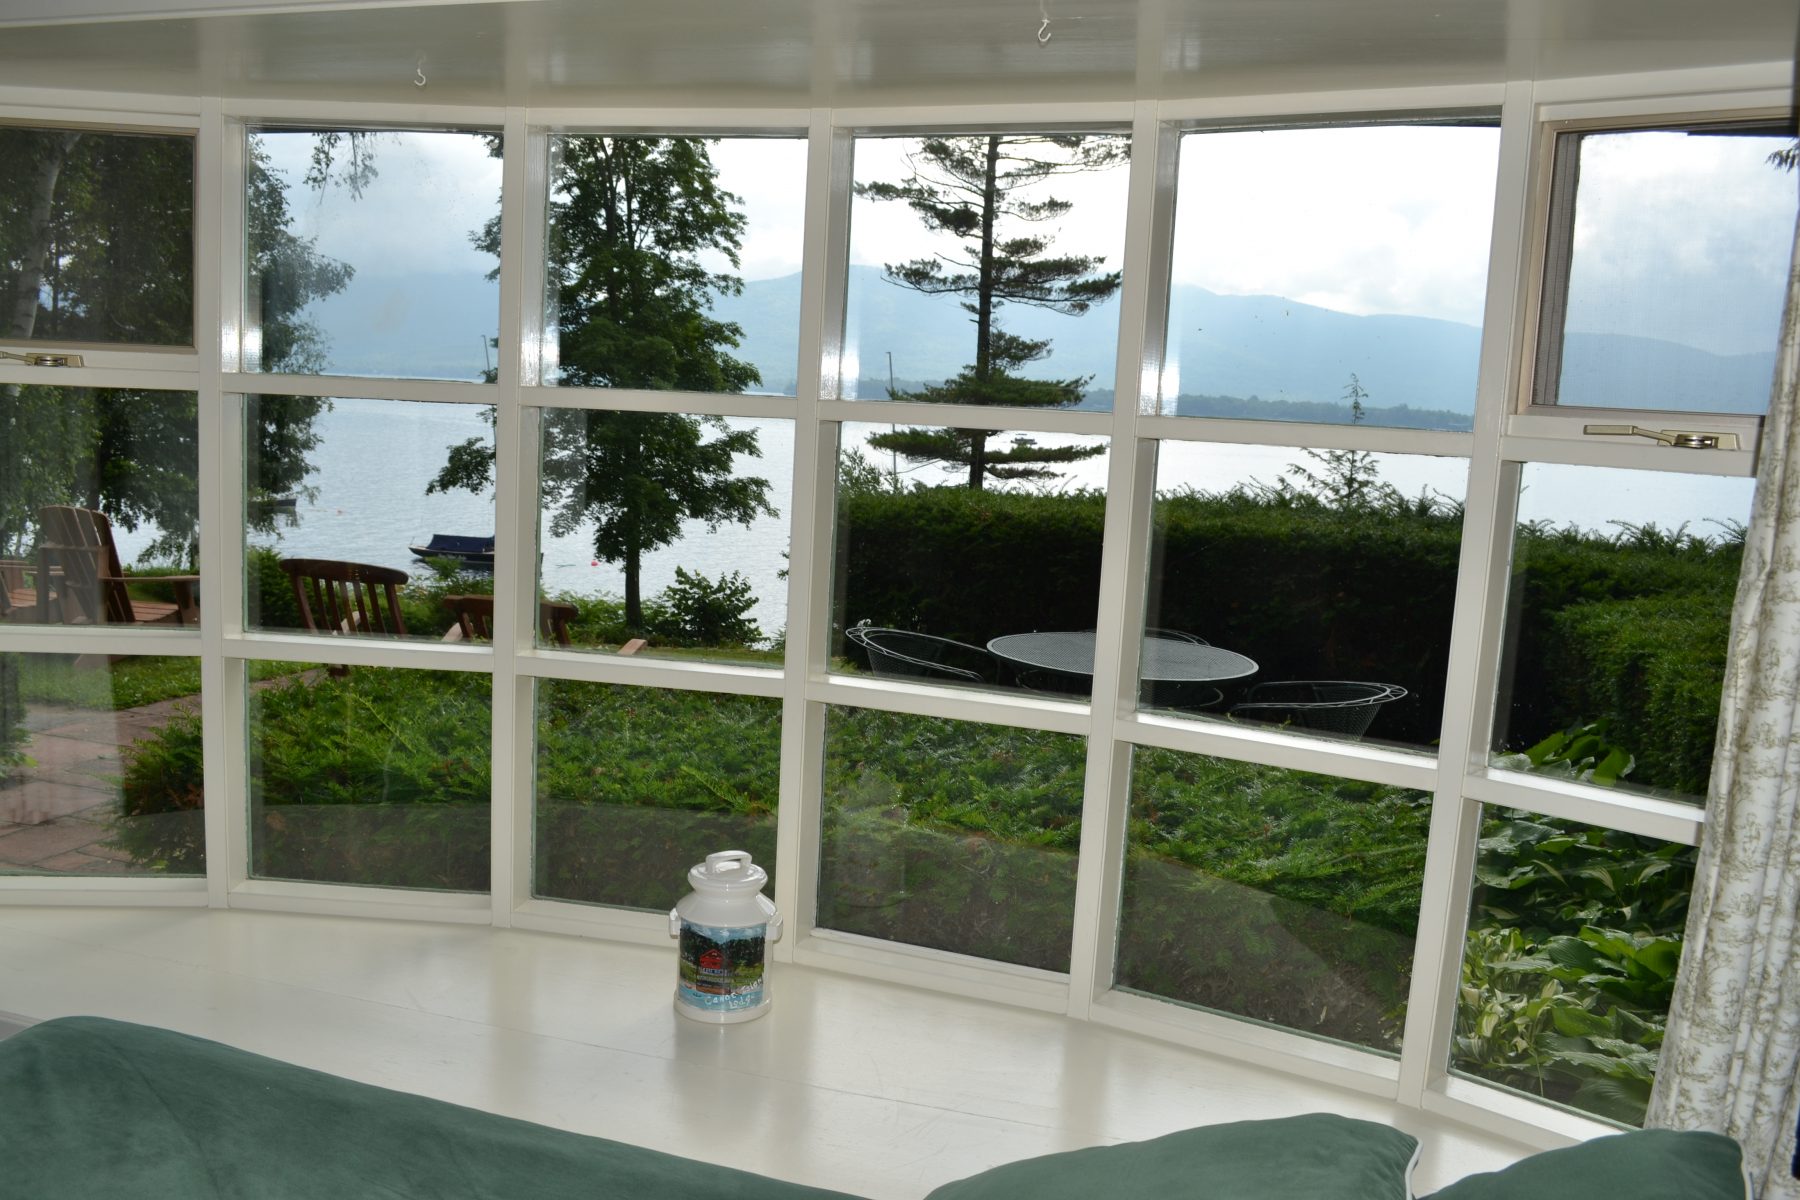 Looking out through large window to Lake George